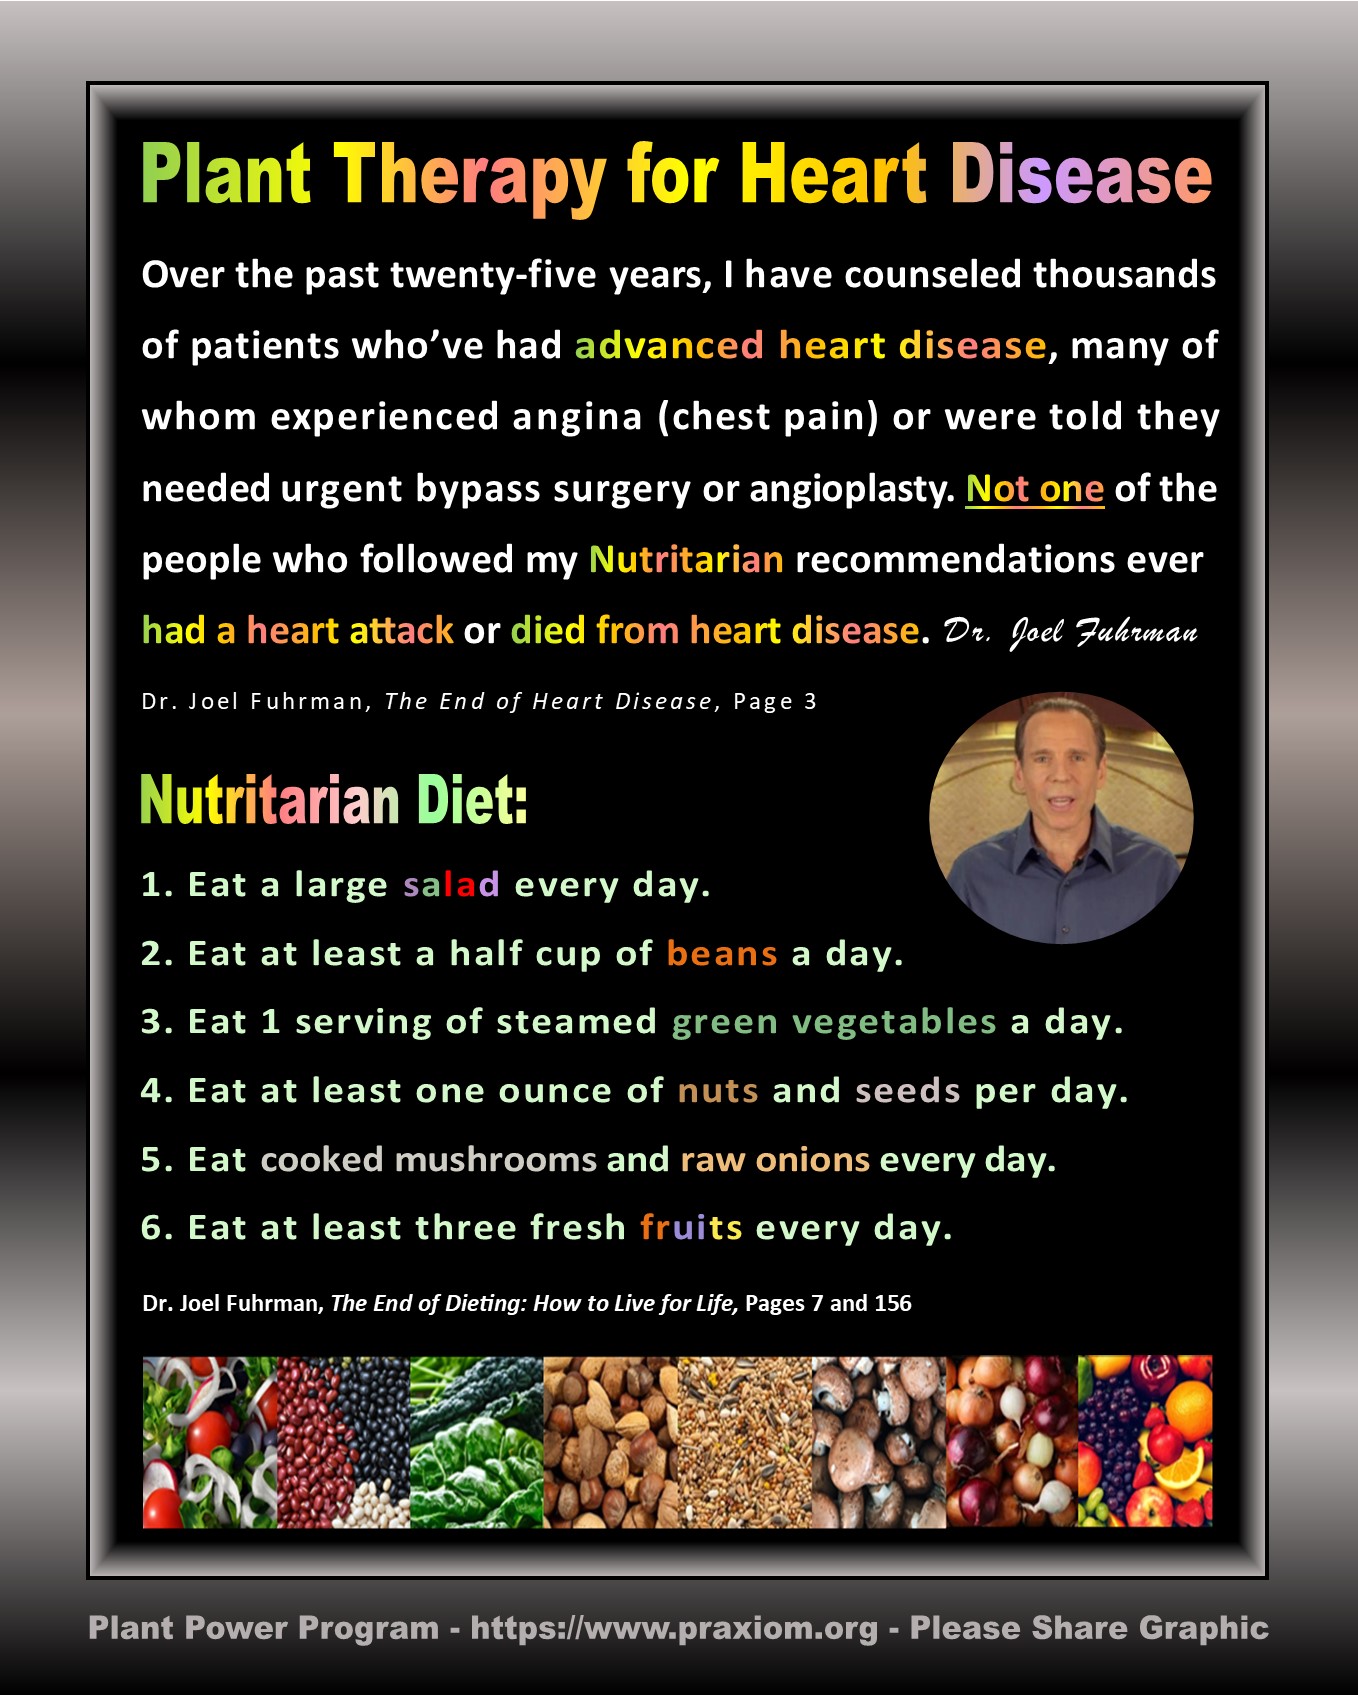 Plant Therapy for Heart Disease - Dr. Joel Fuhrman